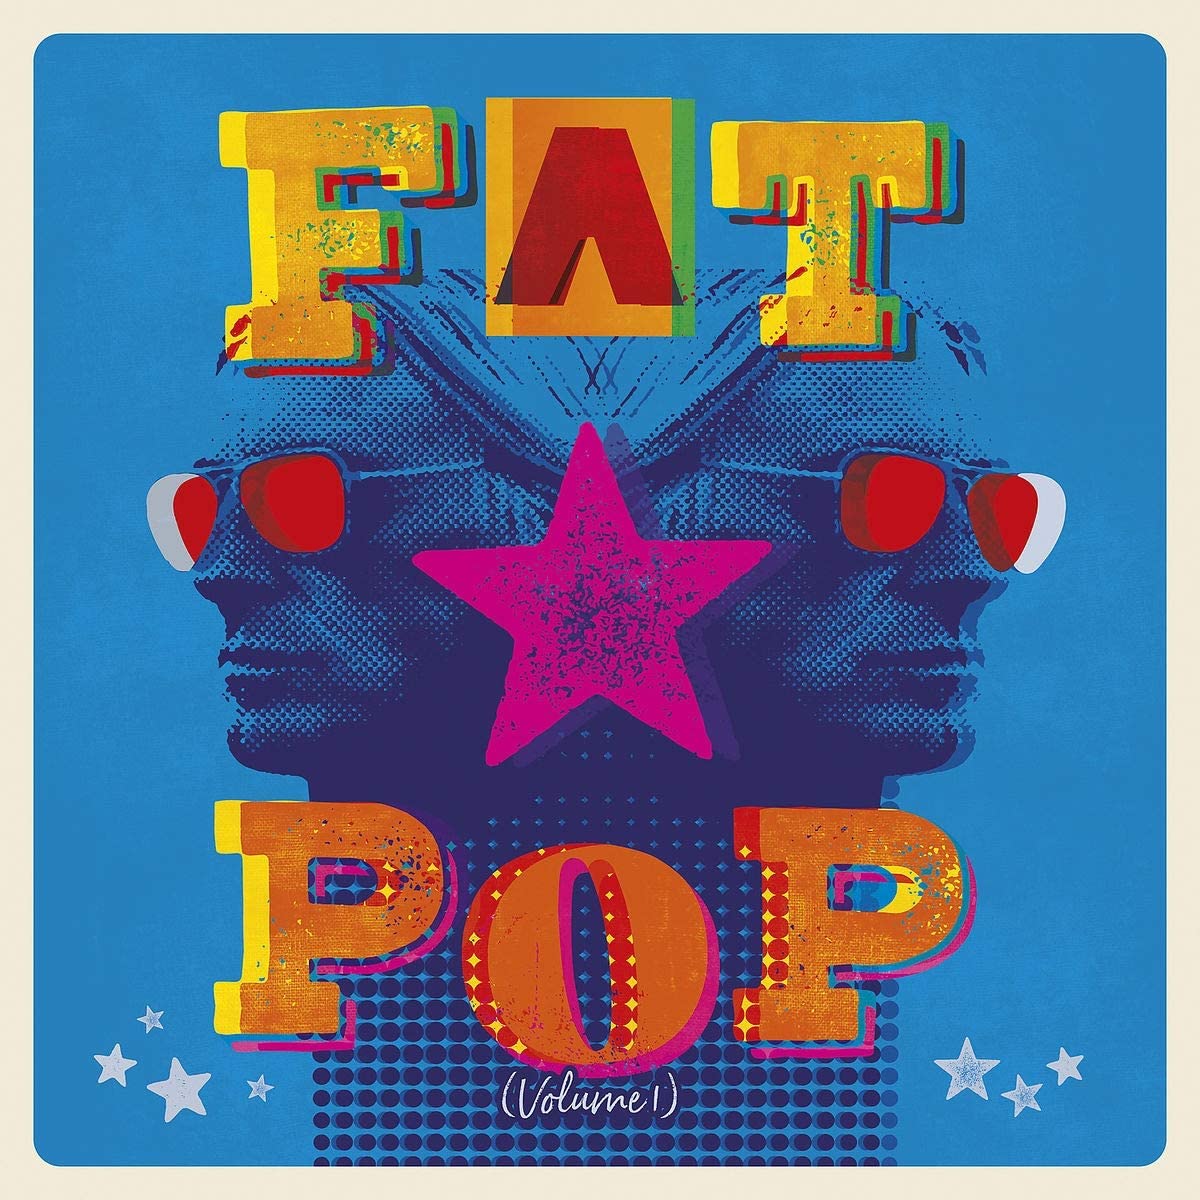 Fat Pop is the brand new album by Paul Weller, released on 14th May 2021 through Polydor Records. Heavyweight black vinyl format, housed in reverse board single sleeve with download code.